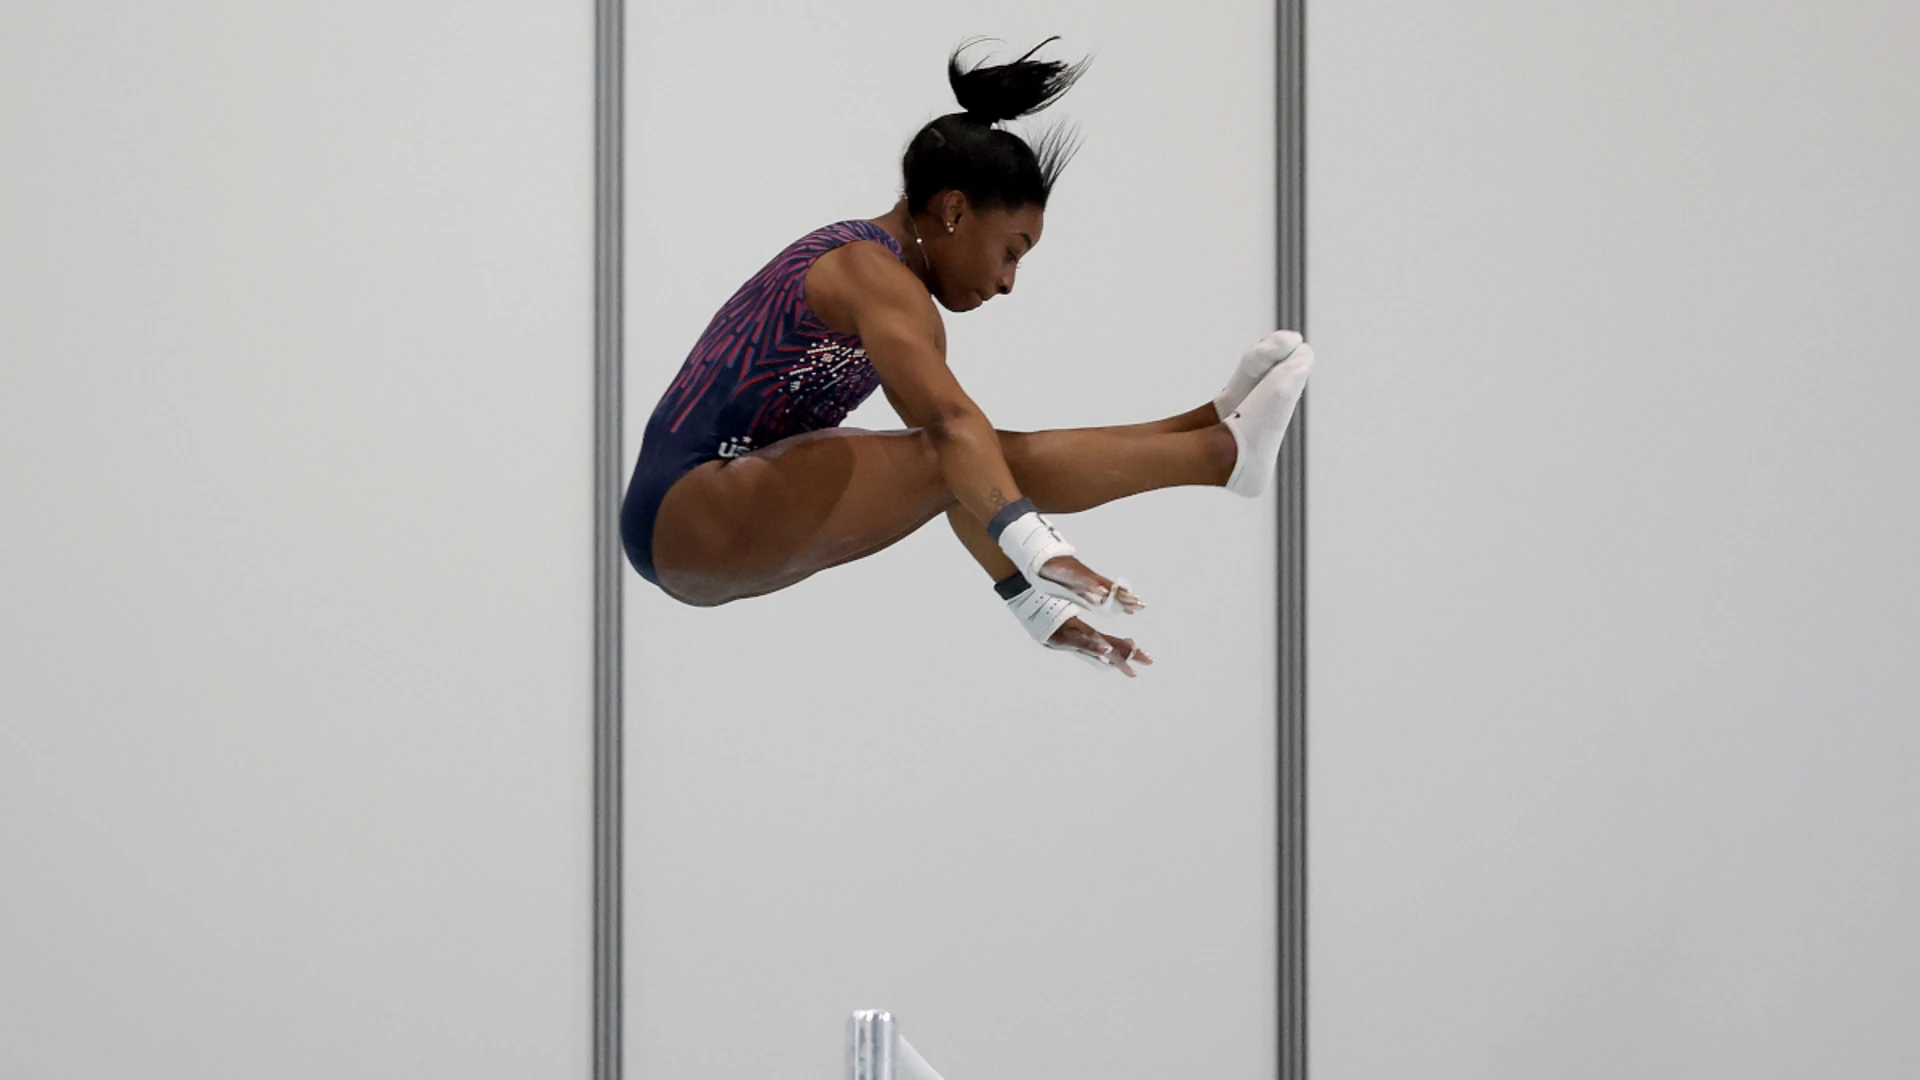 Biles eyes gymnastics history and unfinished business at Paris Games